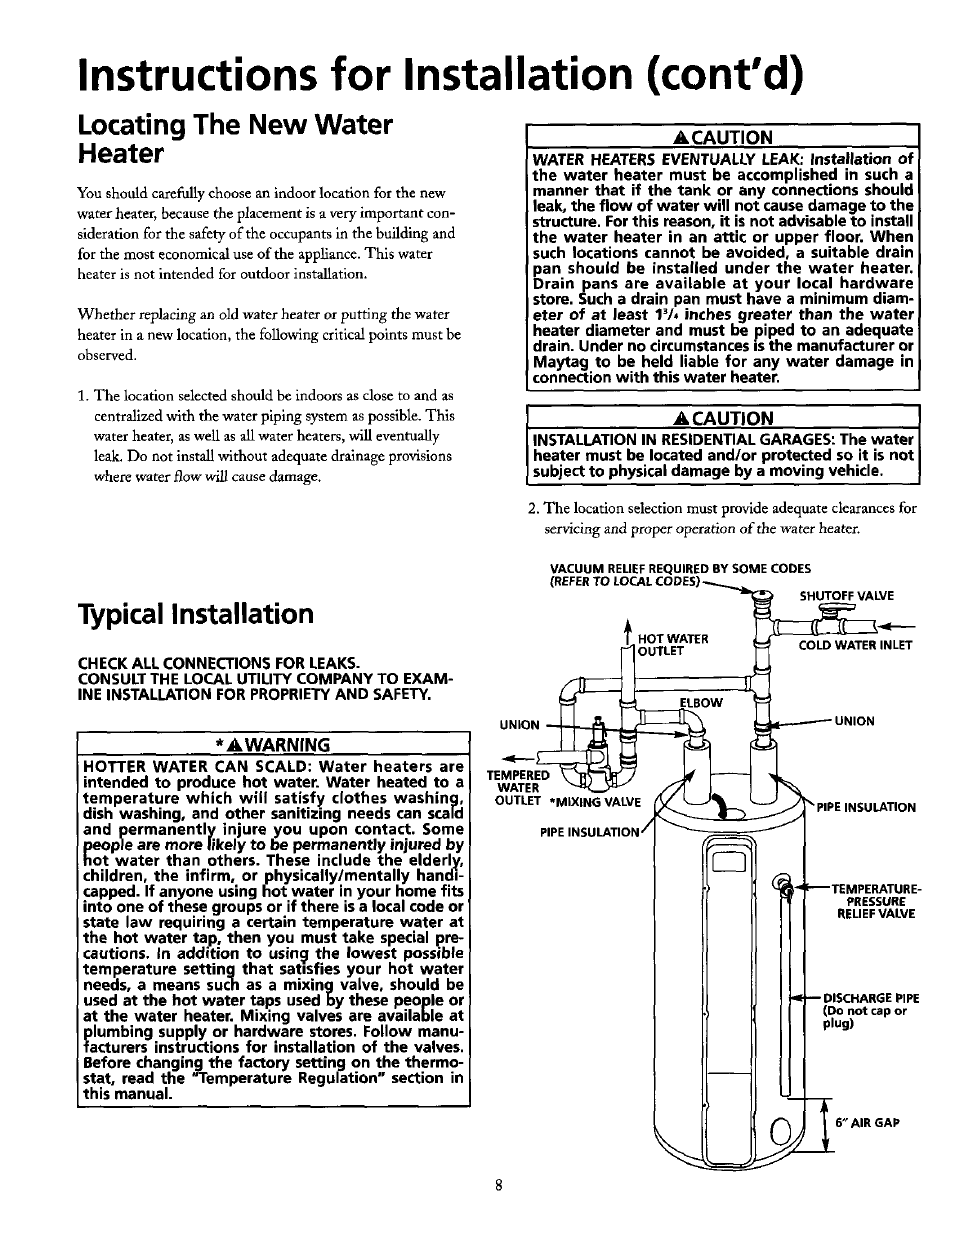 Locating the new water heater, A caution, Typical installation | A warning, Locating the new water heater typical installation, Instructions for installation (cont'd) | Maytag HE21250PC User Manual | Page 8 / 40